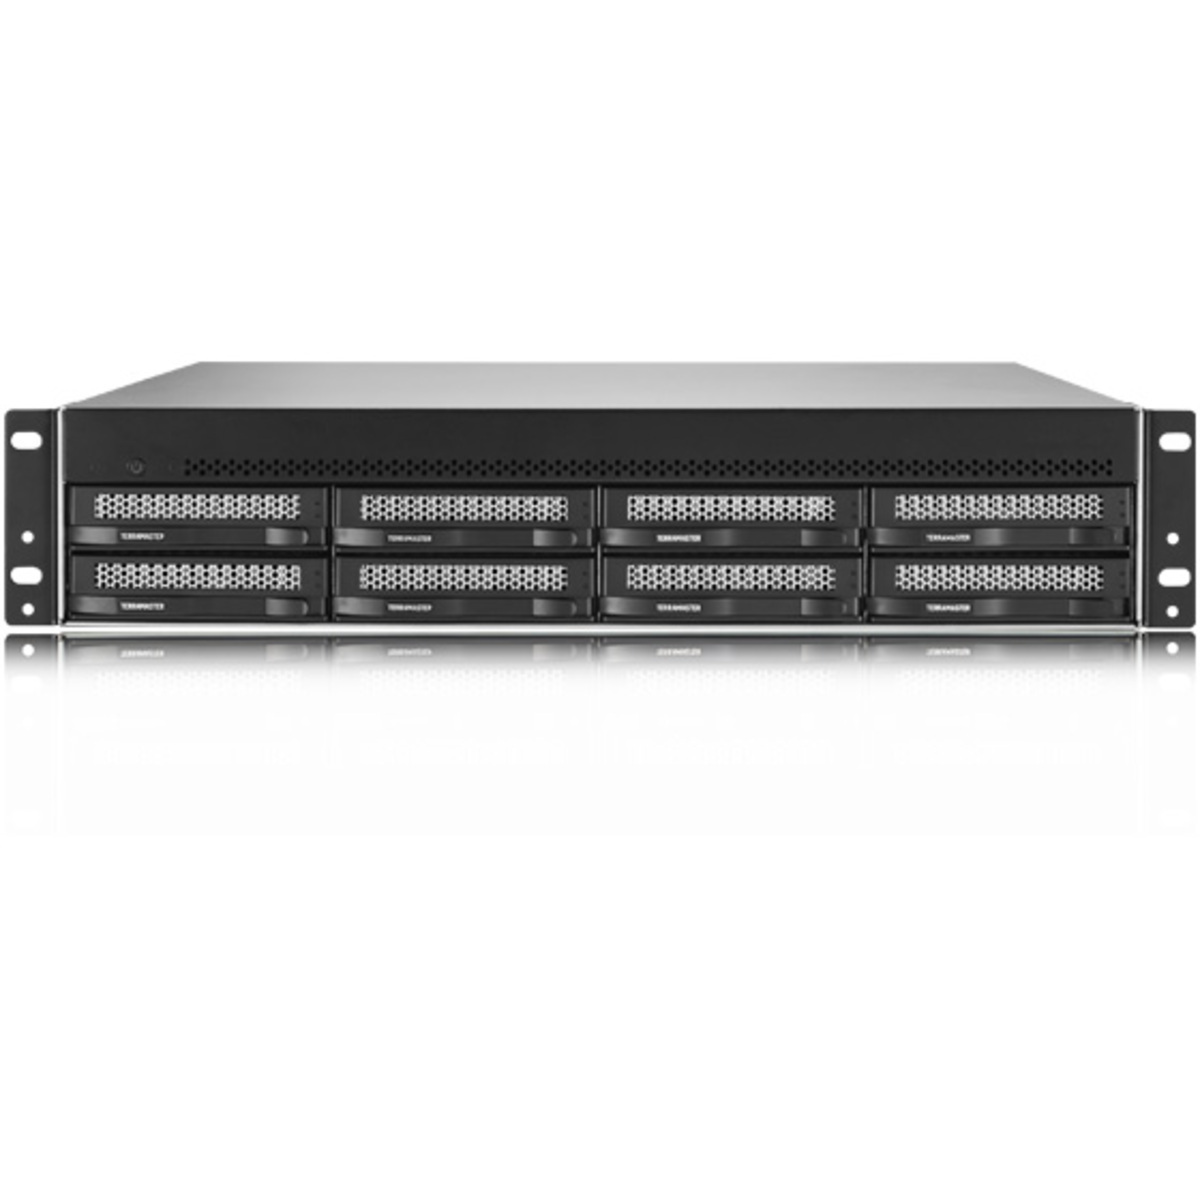 TerraMaster U8-450 24tb 8-Bay RackMount Multimedia / Power User / Business NAS - Network Attached Storage Device 6x4tb Seagate BarraCuda ST4000DM004 3.5 7200rpm SATA 6Gb/s HDD CONSUMER Class Drives Installed - Burn-In Tested U8-450